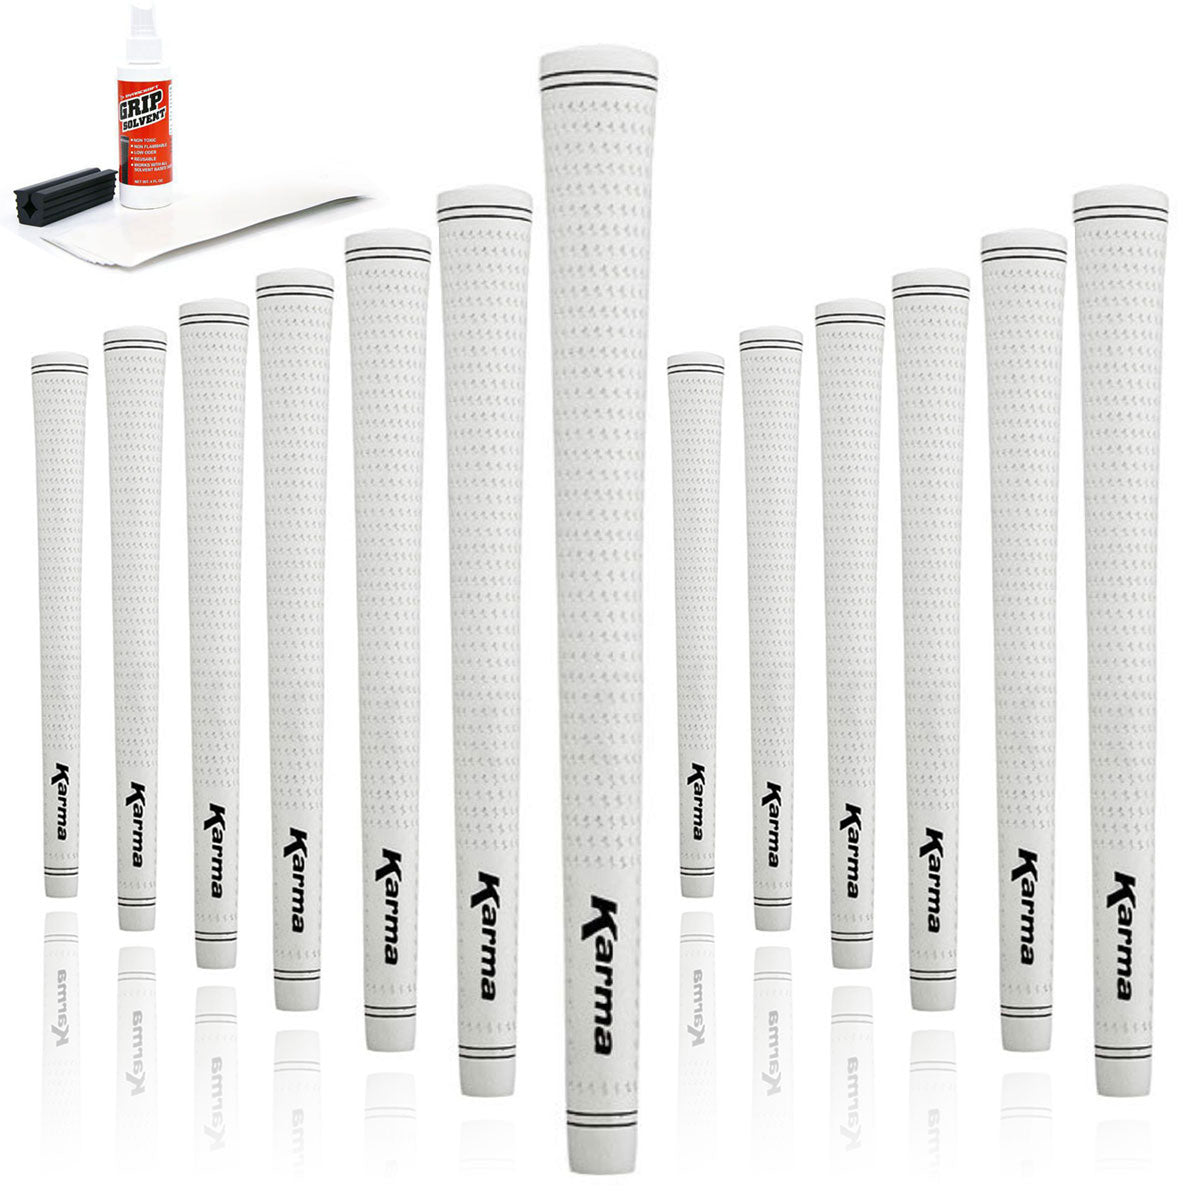 13 Karma Velour White golf grips, golf grip tape strips, bottle of grip solvent and rubber shaft clamp